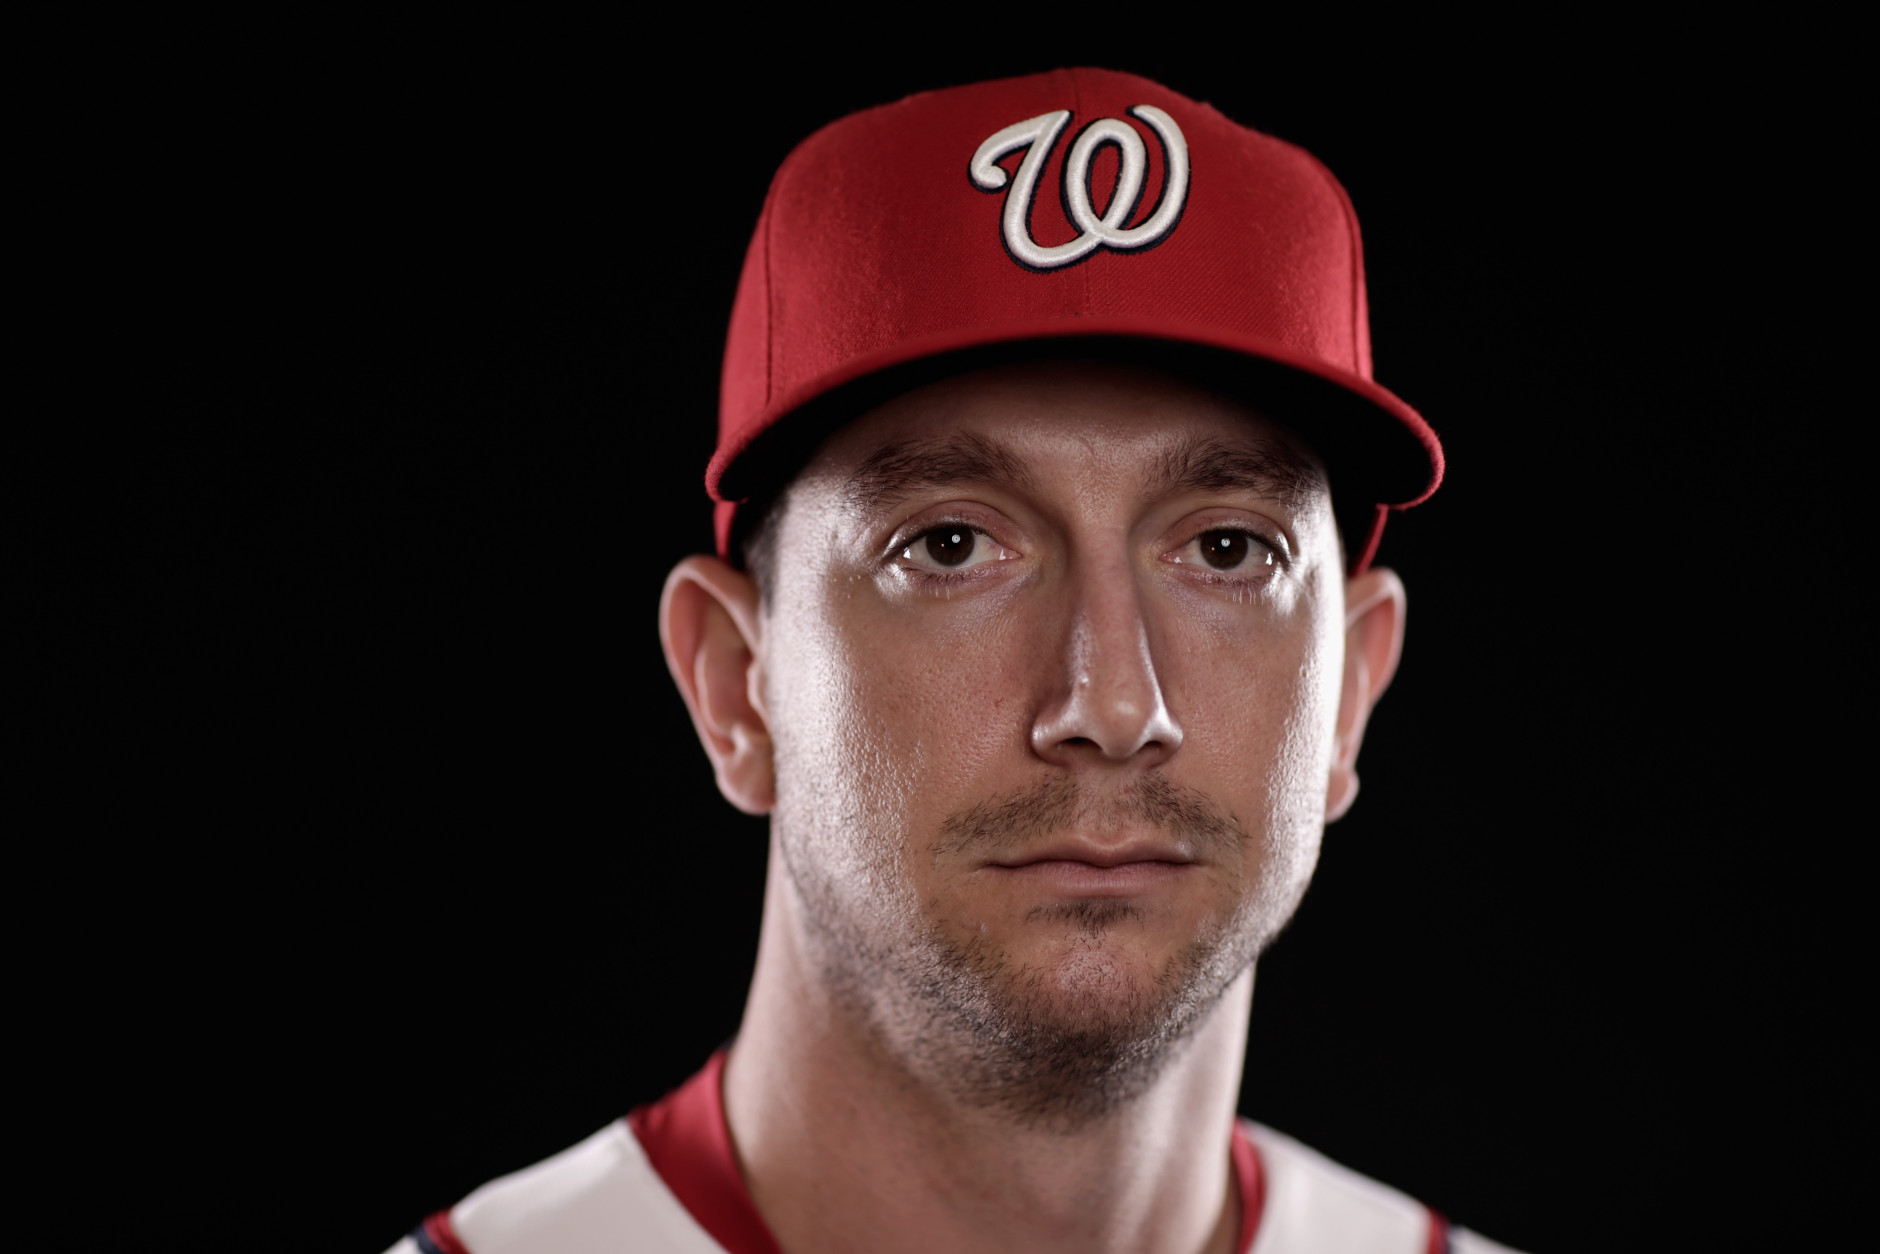 VIERA, FL - MARCH 01:  Jerry Blevins #13 of the Washington Nationals poses for a portrait during photo day at Space Coast Stadium on March 1, 2015 in Viera, Florida.  (Photo by Chris Trotman/Getty Images)